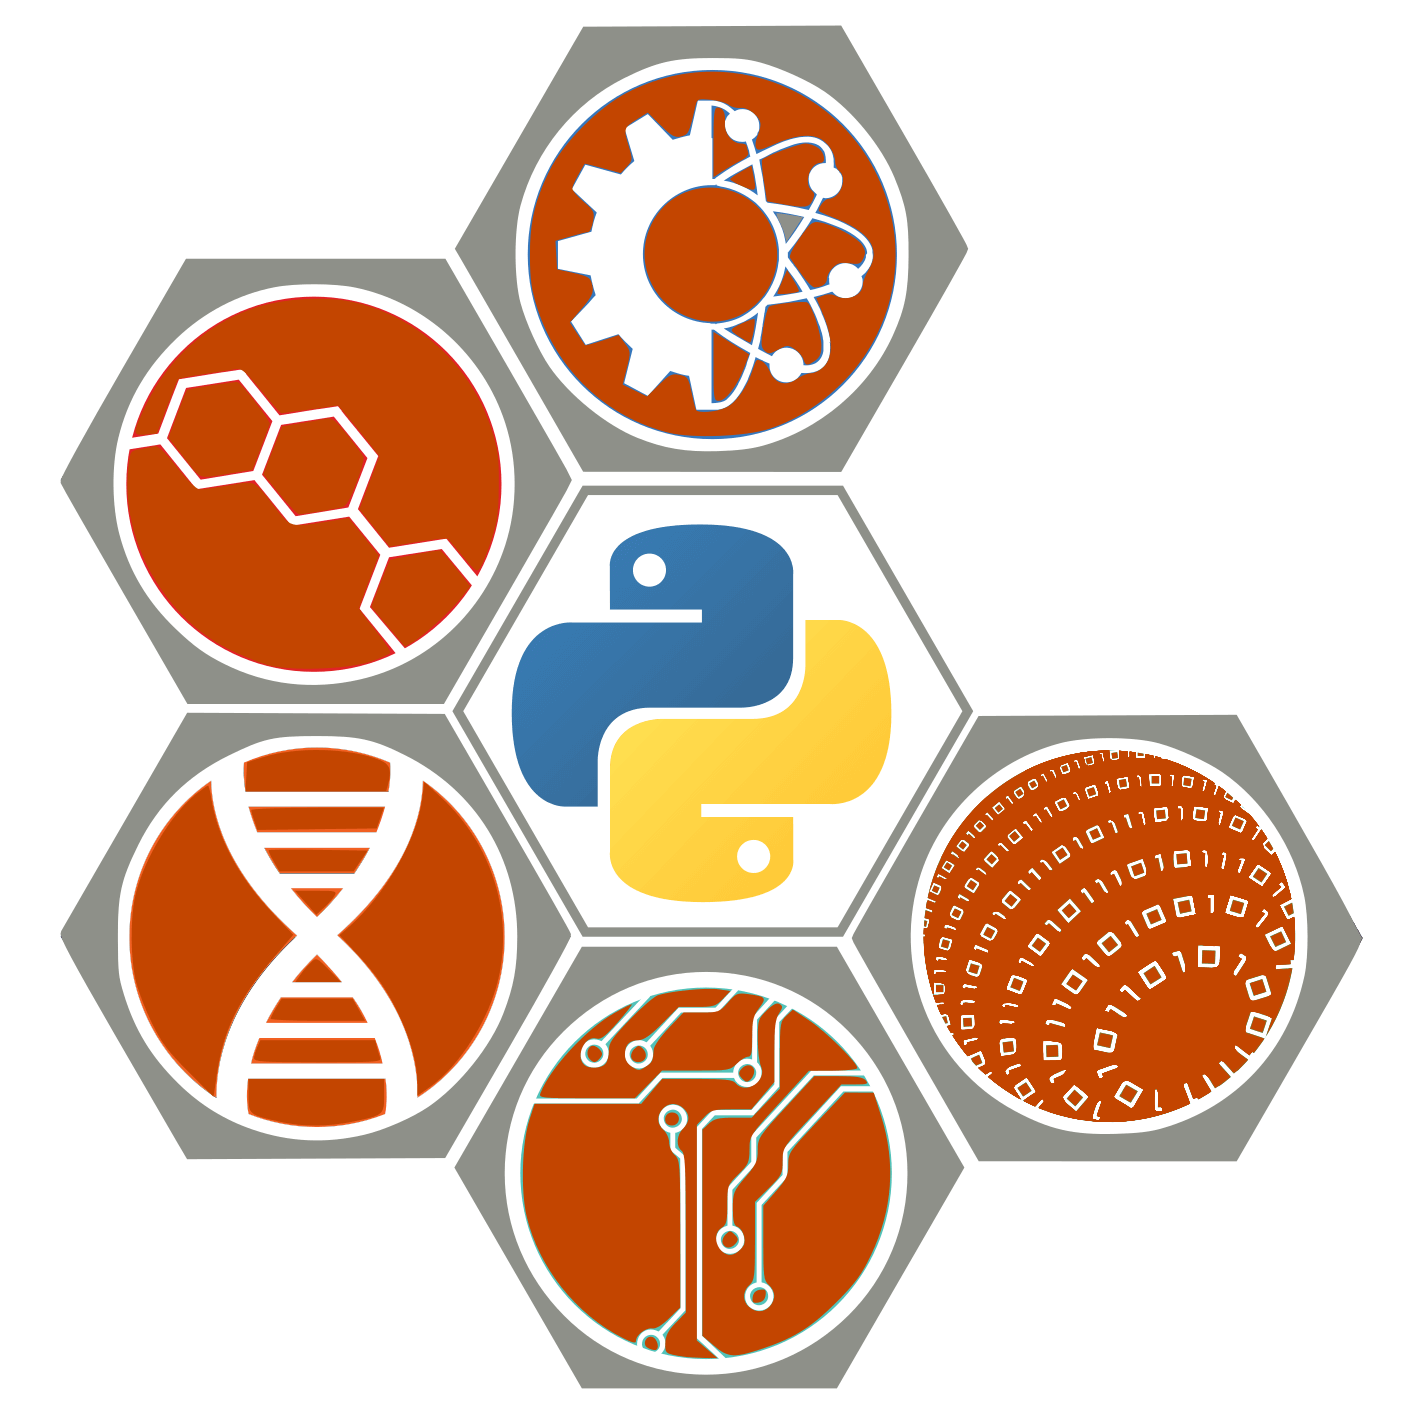 Figure showing mathematical and scientific icons surrounding the Python logo